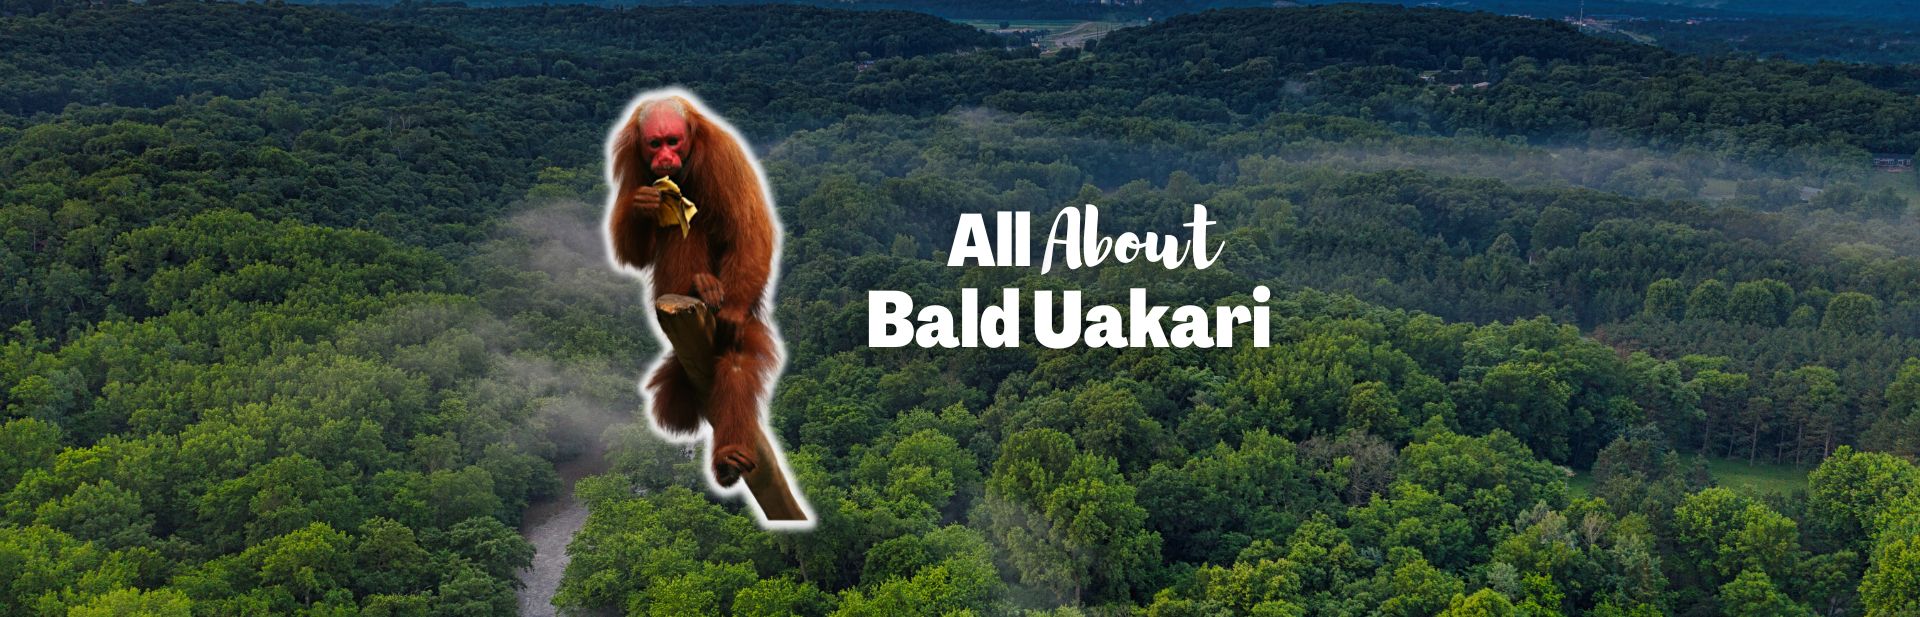 Discover the Bald Uakari: The Amazon’s Red-Faced Primate Marvel